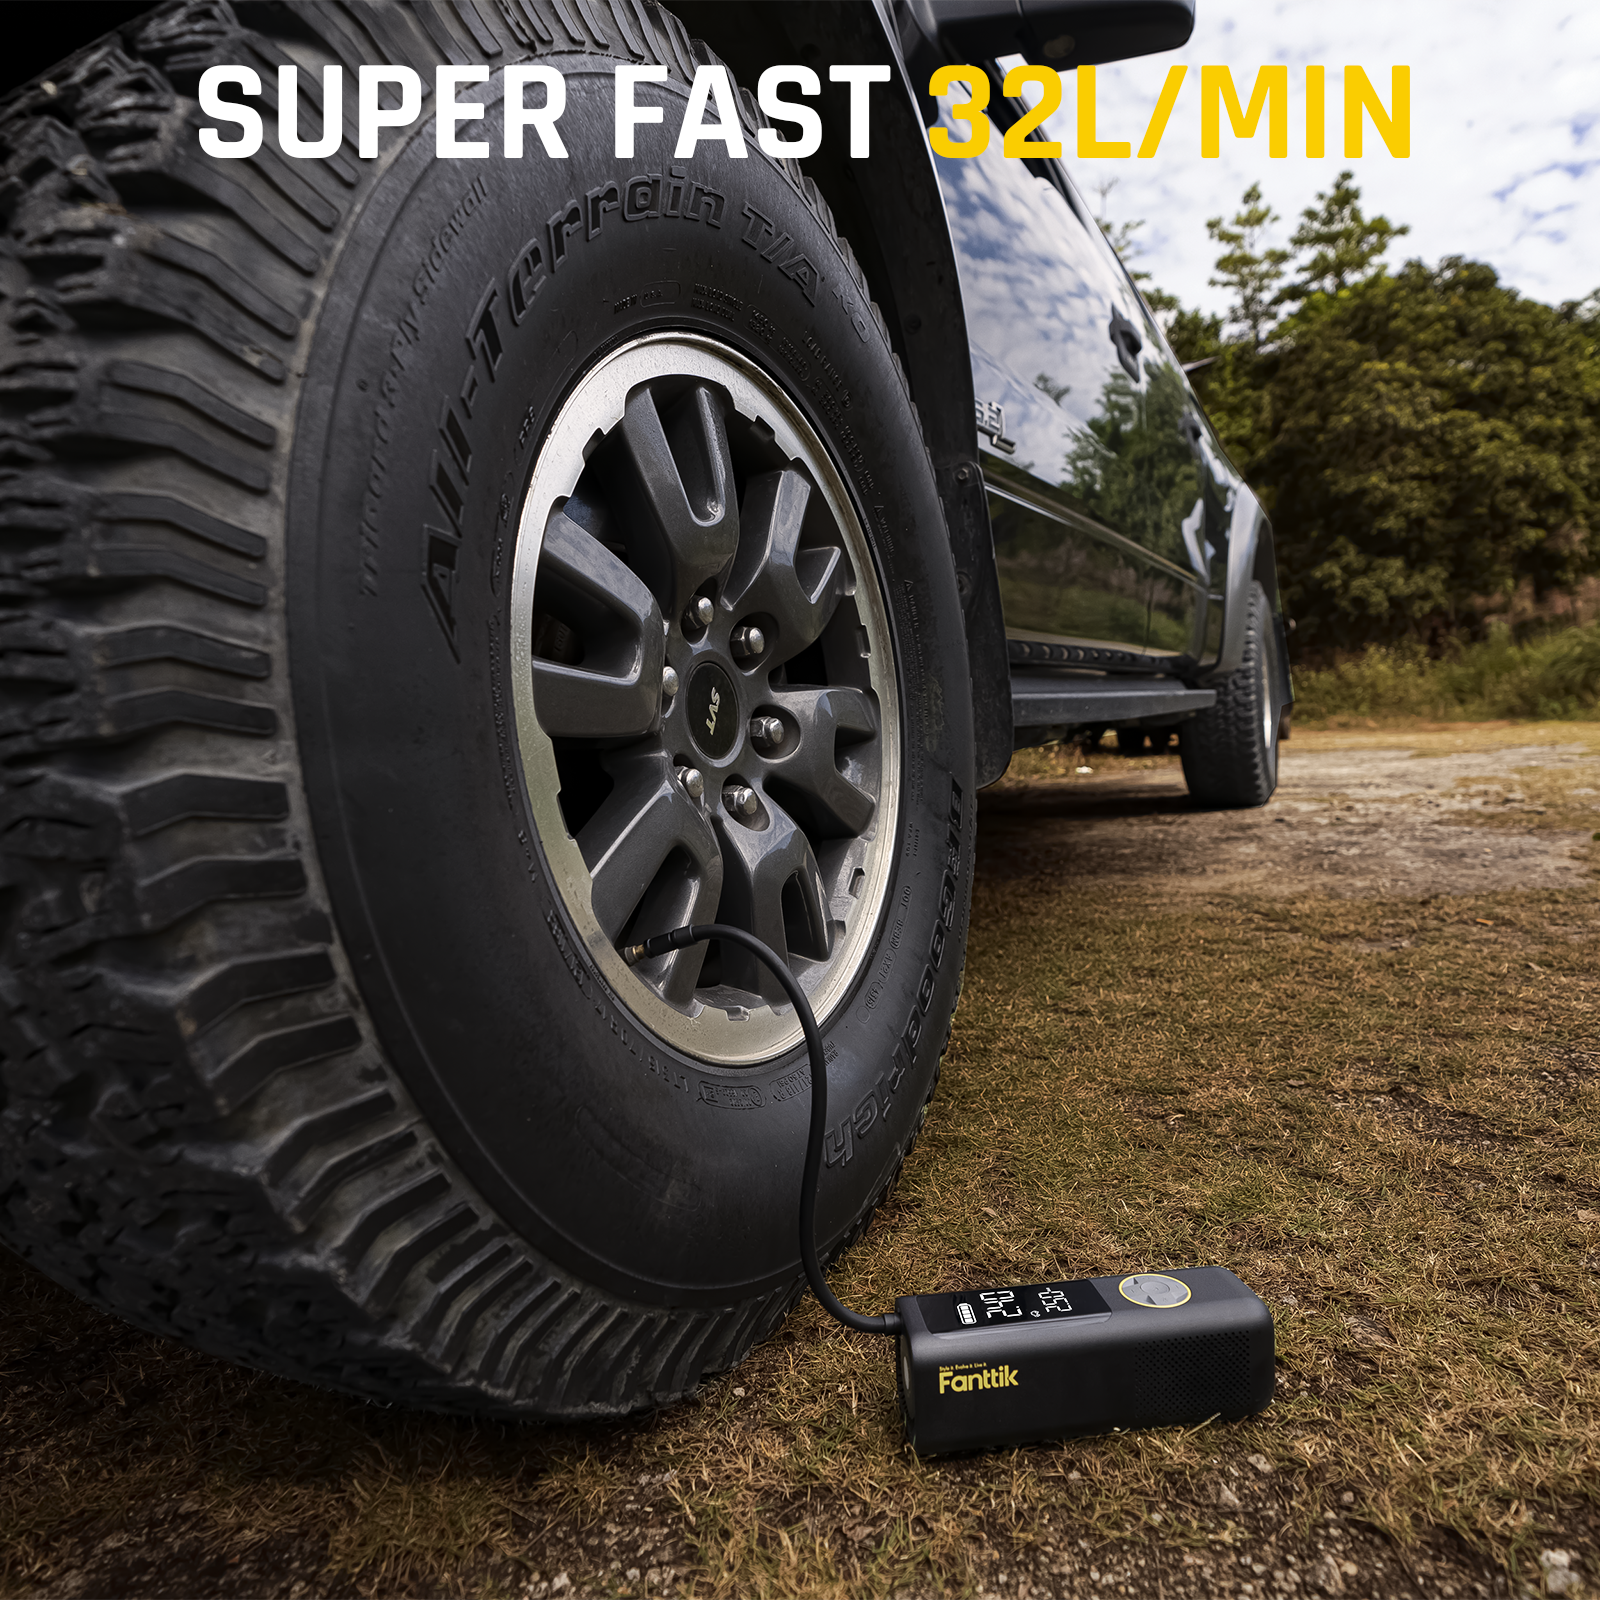 The powerful X8 APEX tire inflator has a built-in high-performance chip that can quickly inflate tires and provide 32L/Min of airflow.